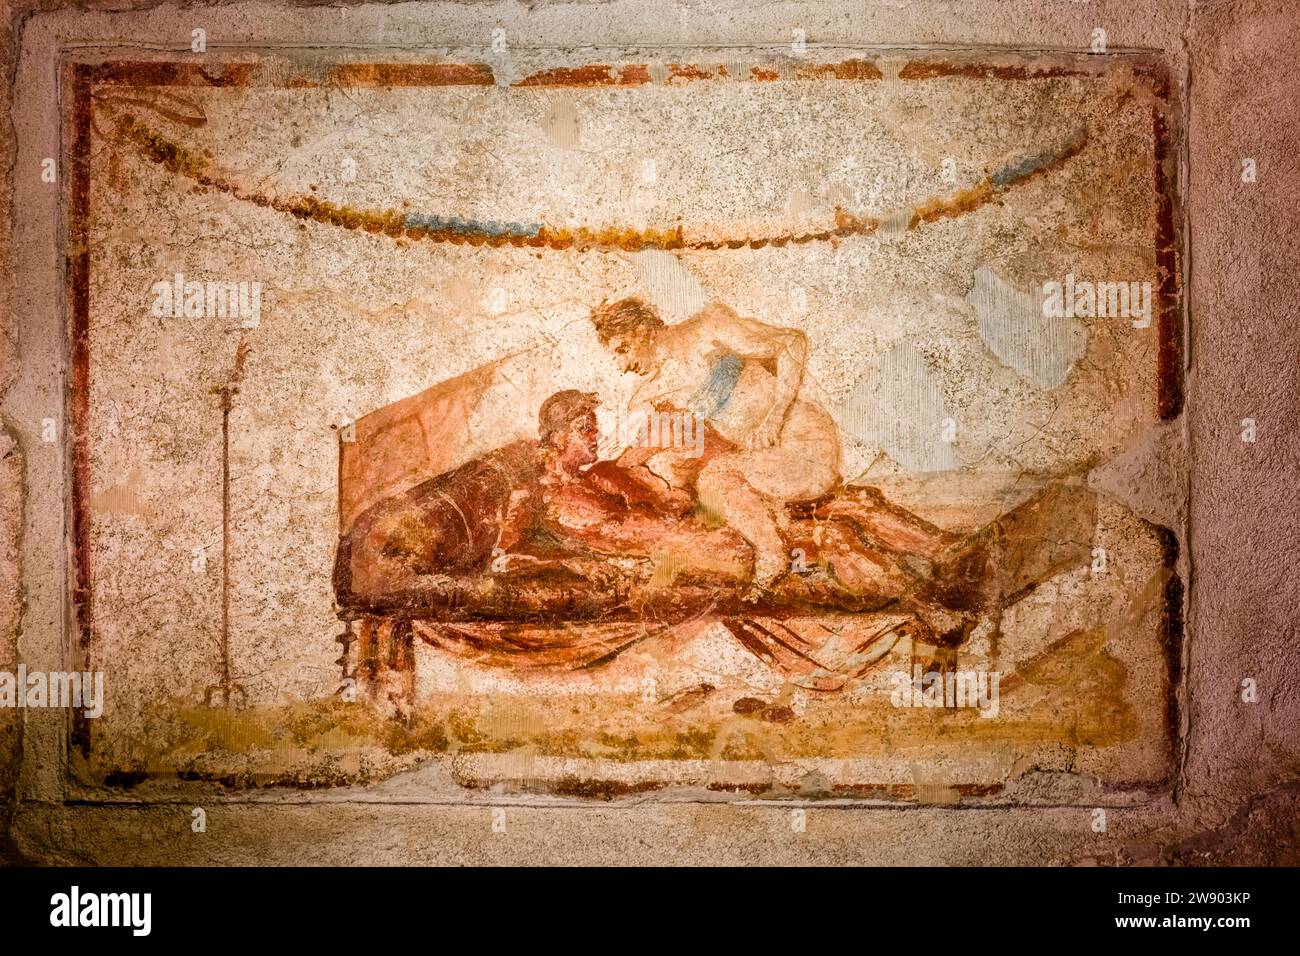 Wall paintings in the Lupanar, brothel in the archaeological site of Pompeii, an ancient city destroyed by the eruption of Mount Vesuvius in 79 AD. Stock Photo